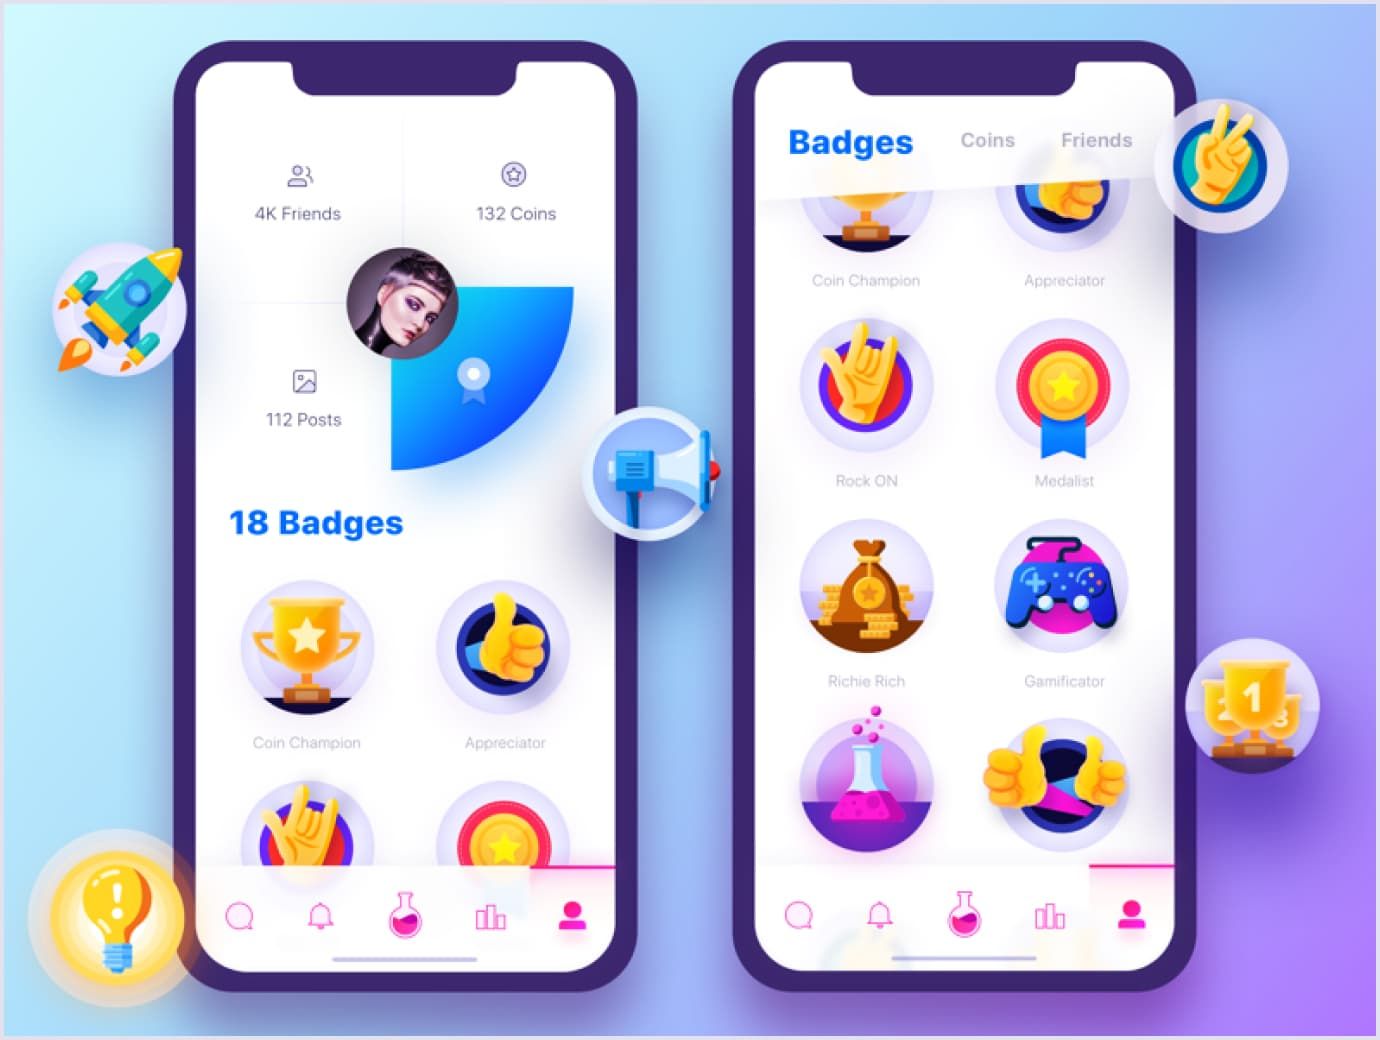 Badges and achievements in the app